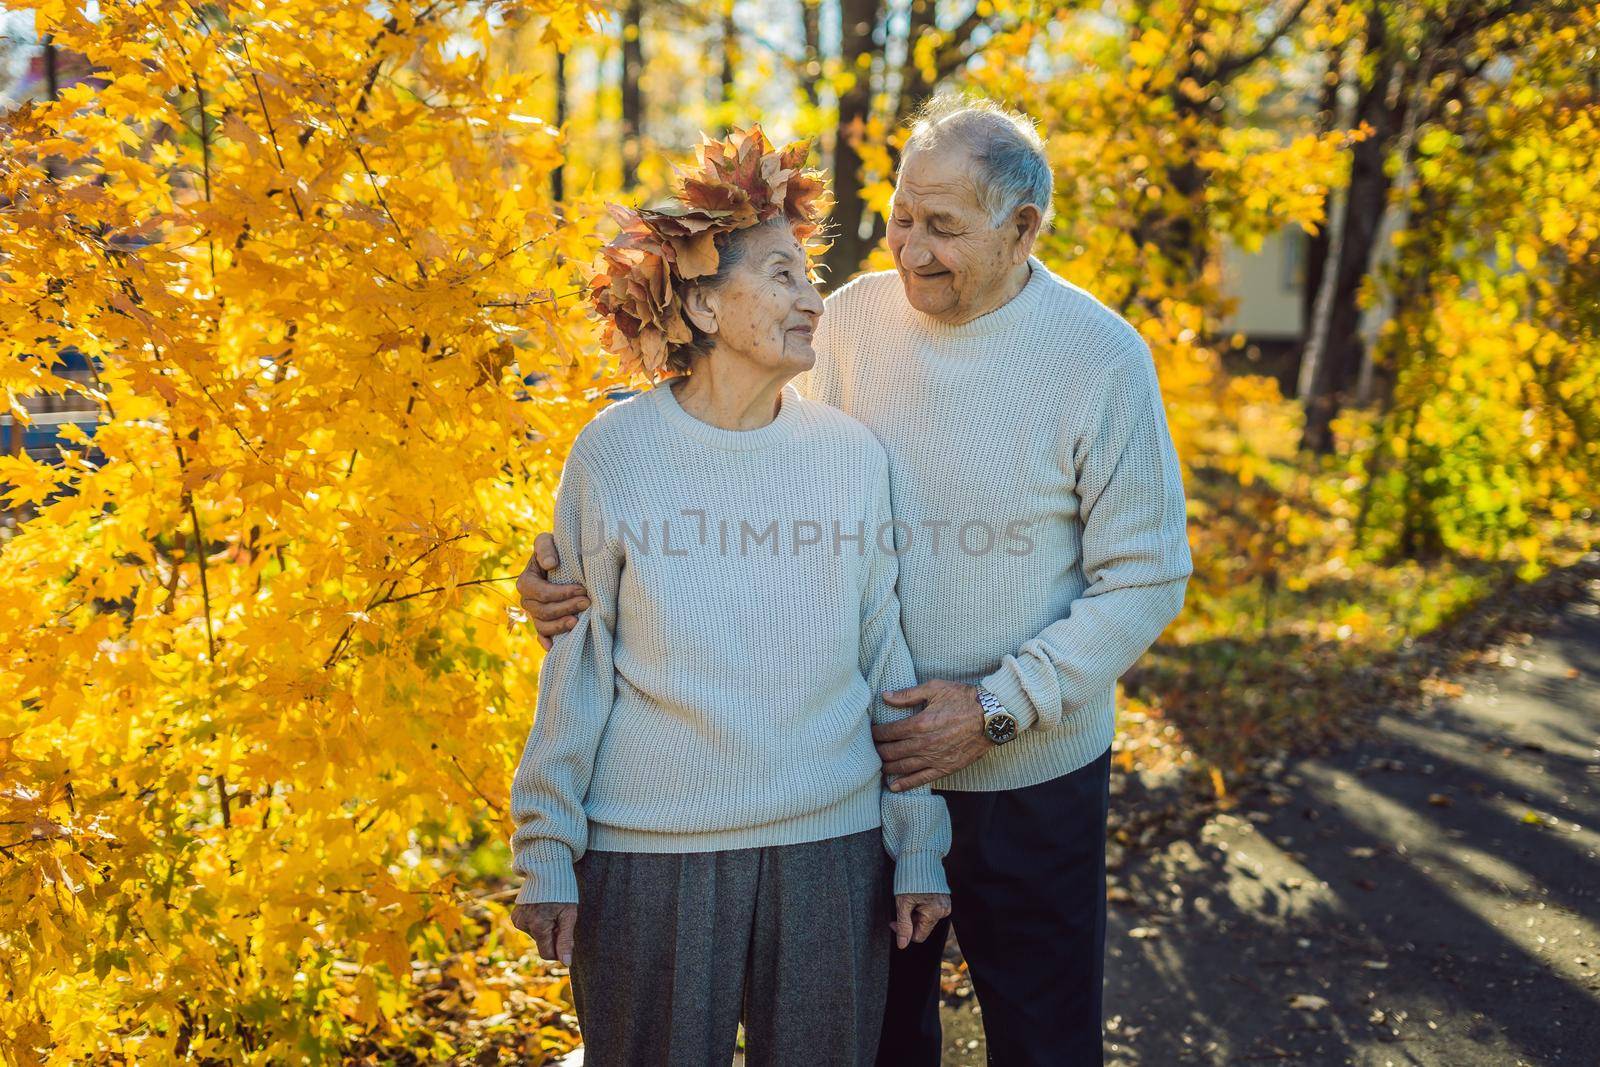 Happy old couple having fun at autumn park. Elderly man wearing a wreath of autumn leaves to his elderly wife.